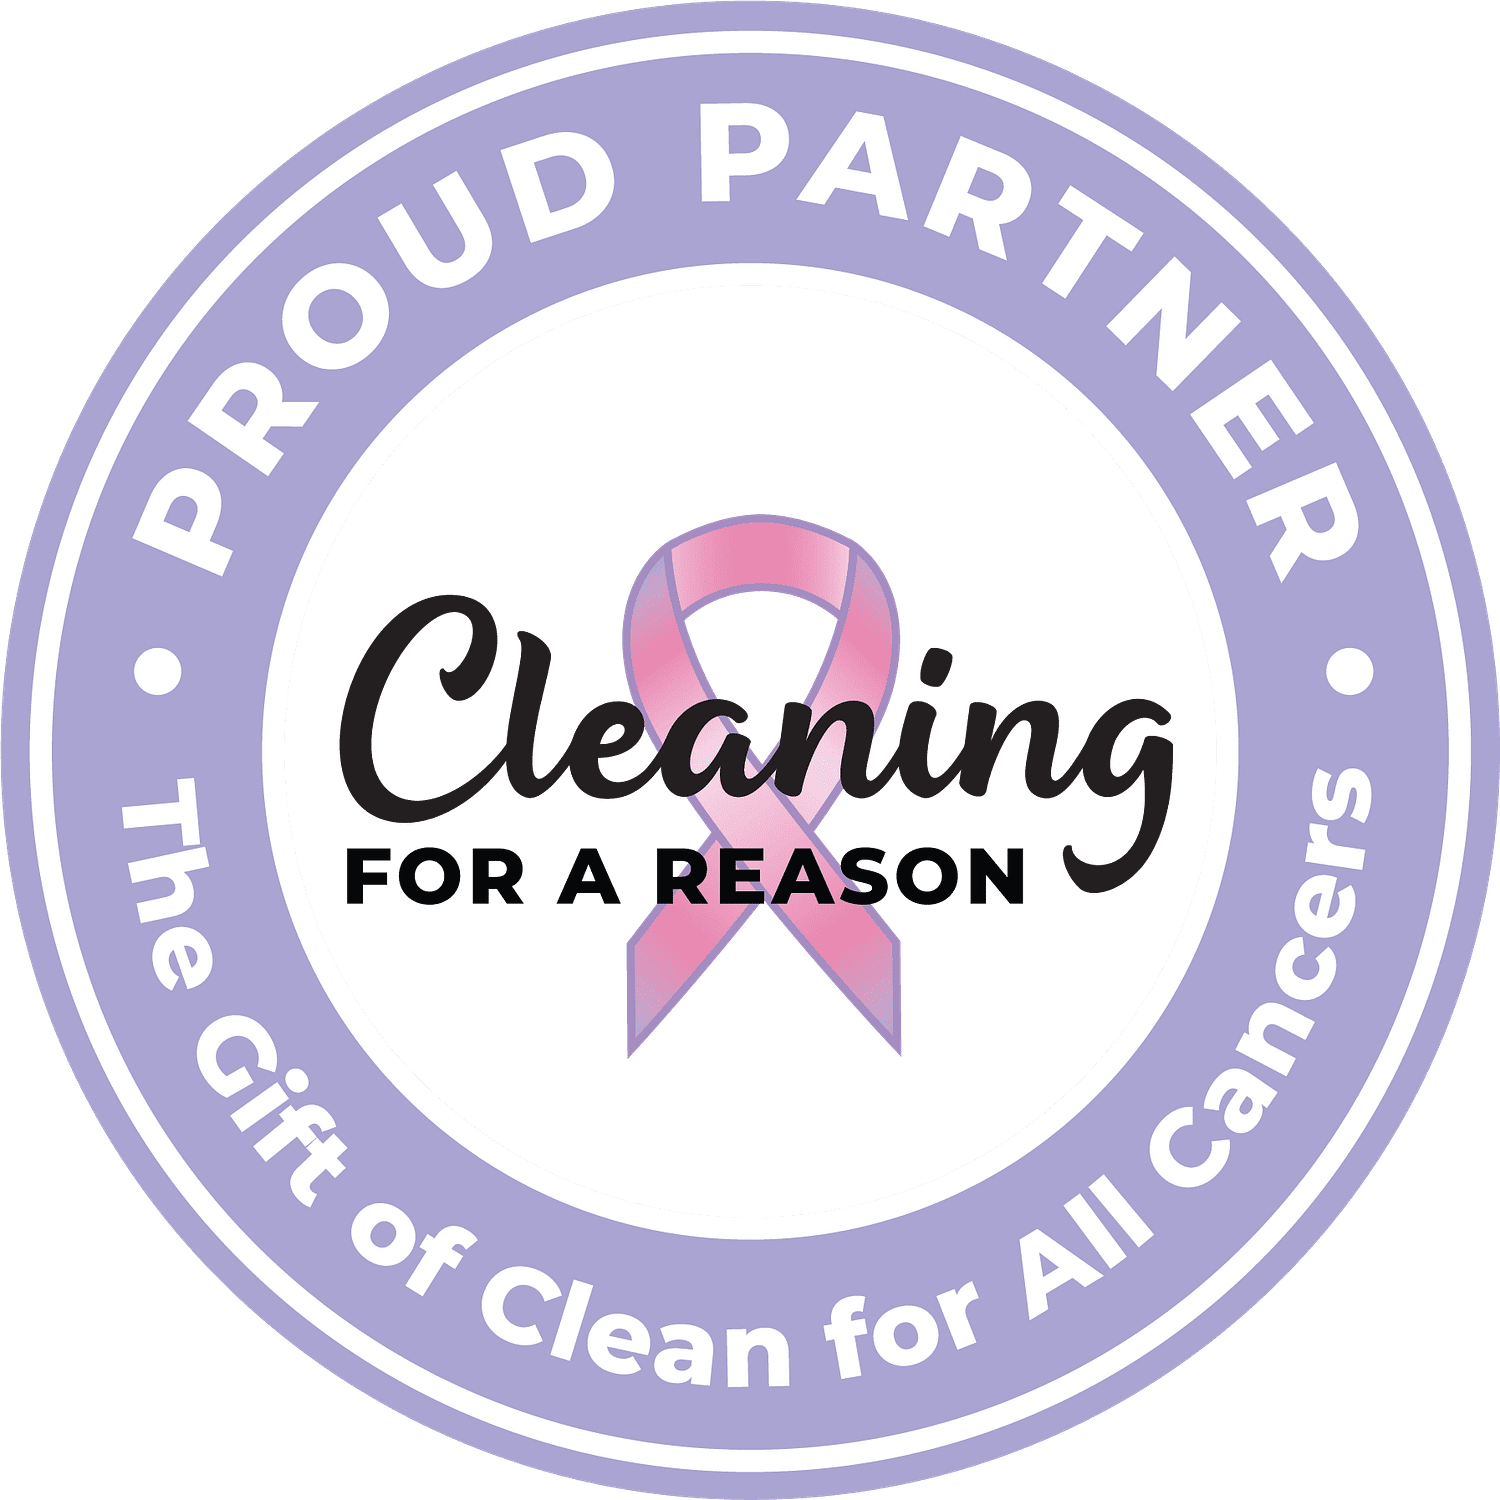 Primavera Cleaning - Proud Partner of Cleaning For A ReasonCleaning for a Reason, Madison, WI